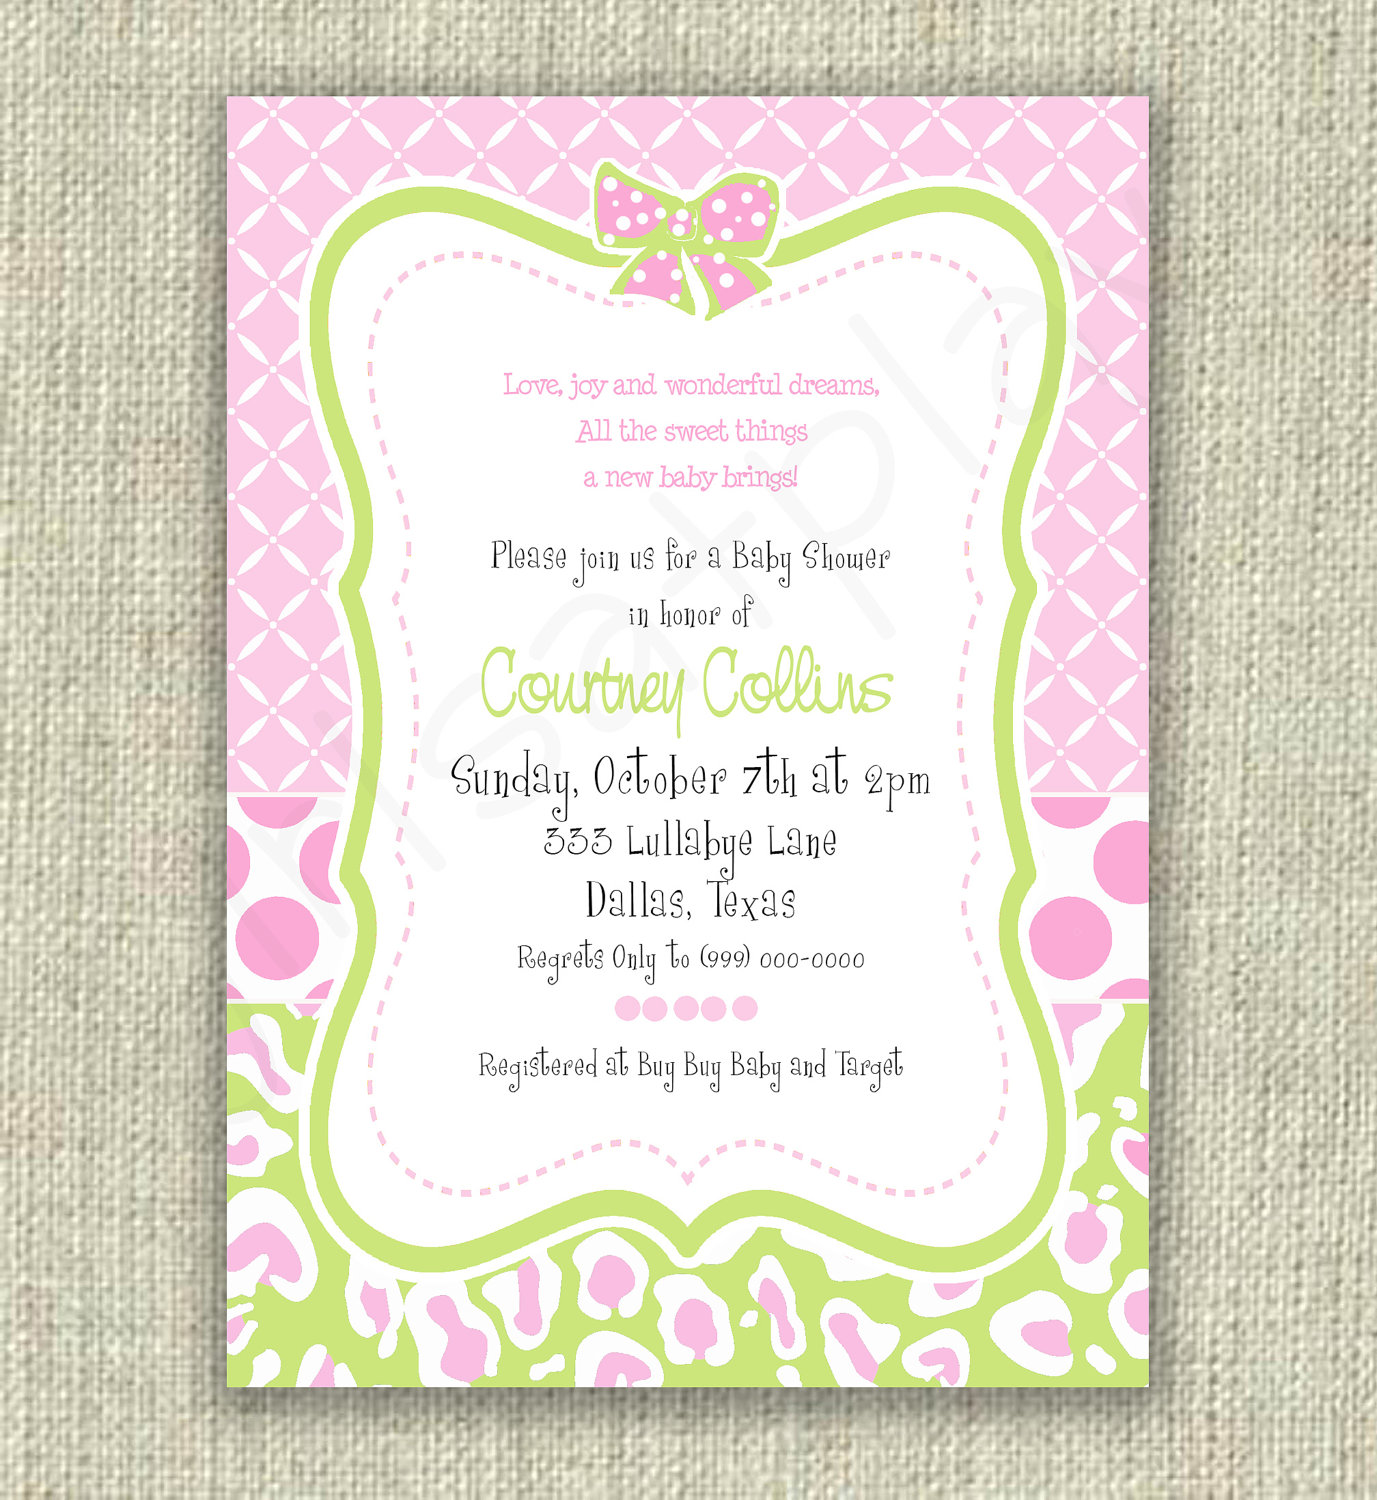 Full Size of Baby Shower:delightful Baby Shower Invitation Wording Picture Designs Baby Shower Invitation Wording Baby Favors Baby Shower Halls Baby Shower De Niño Baby Shower Wishing Well Baby Shower Cards Baby Shower Outfit Guest Baby Shower Invitations Wording Free Invitation Ideas